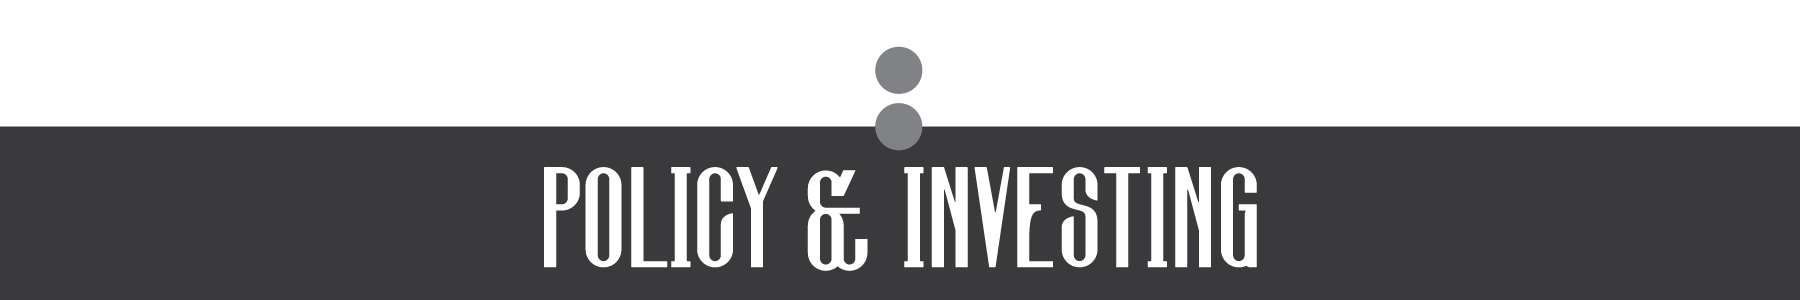 Policy & Investing header